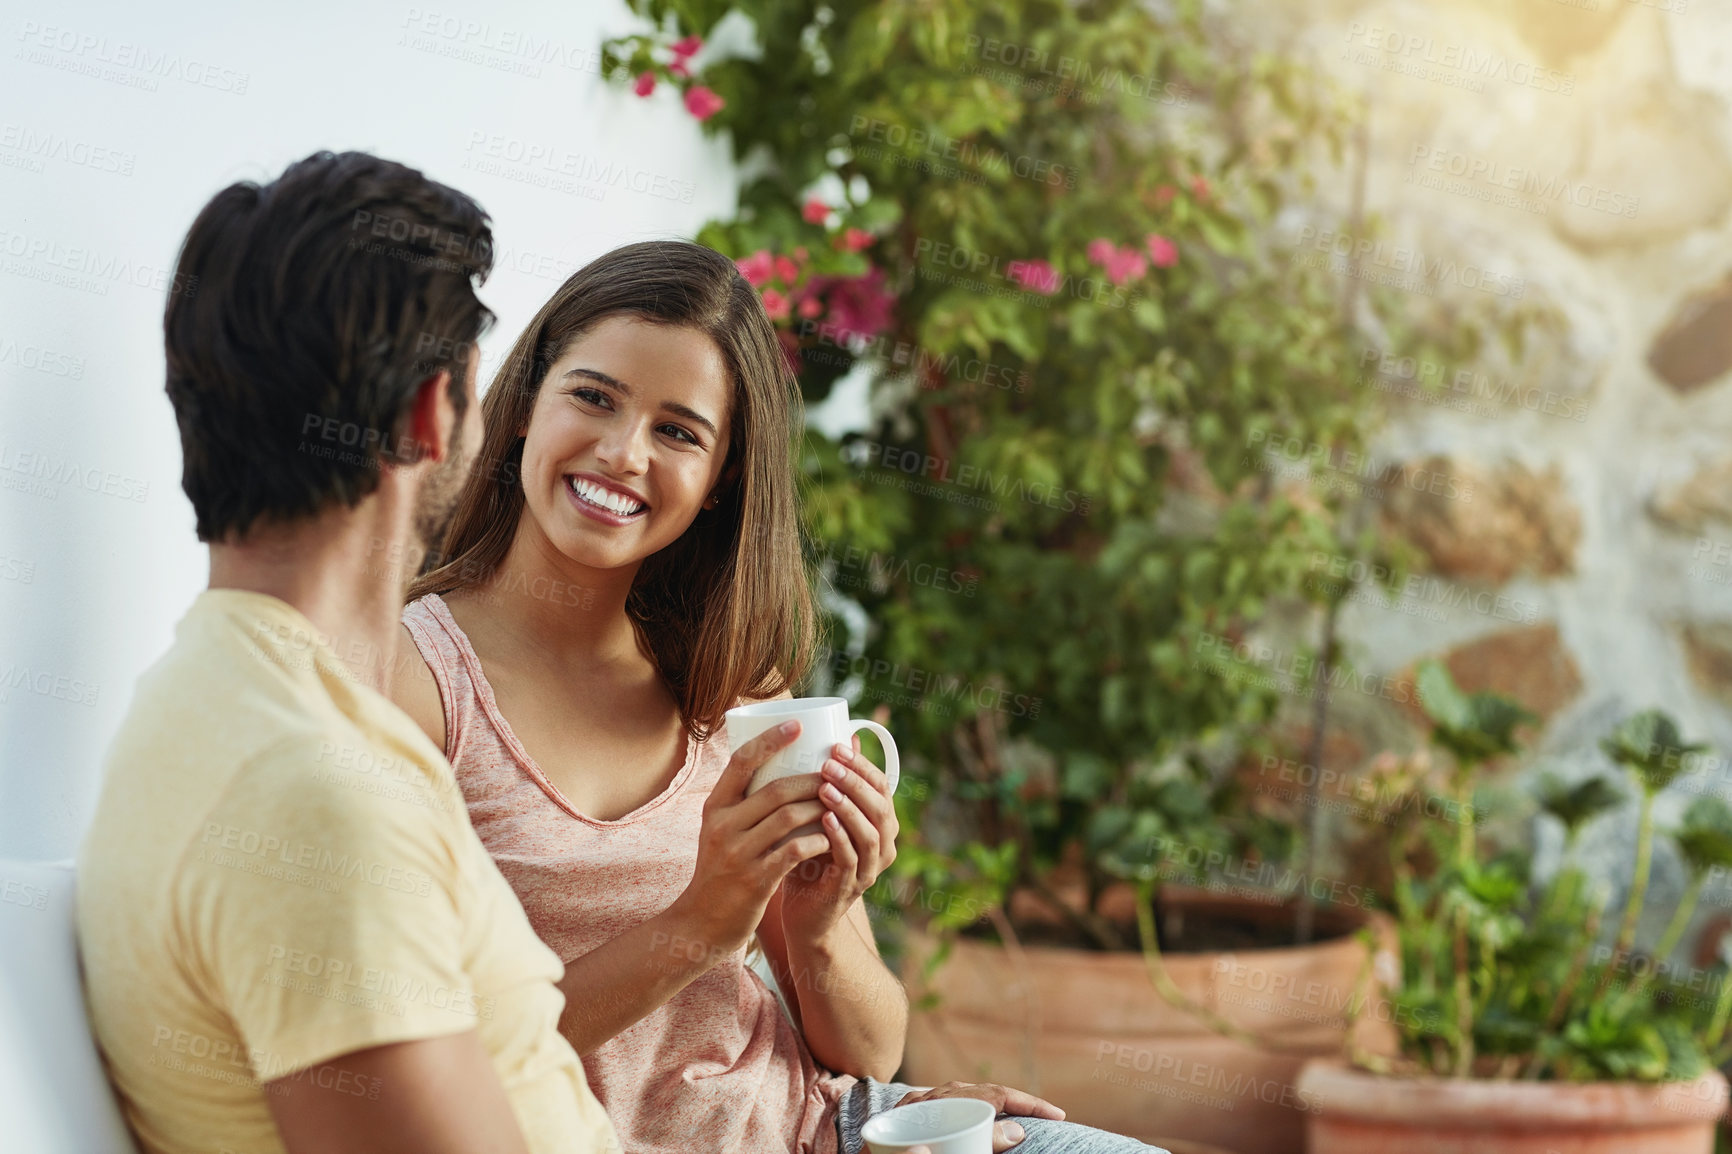 Buy stock photo Shot of a happy young couple having coffee together on a bench outside